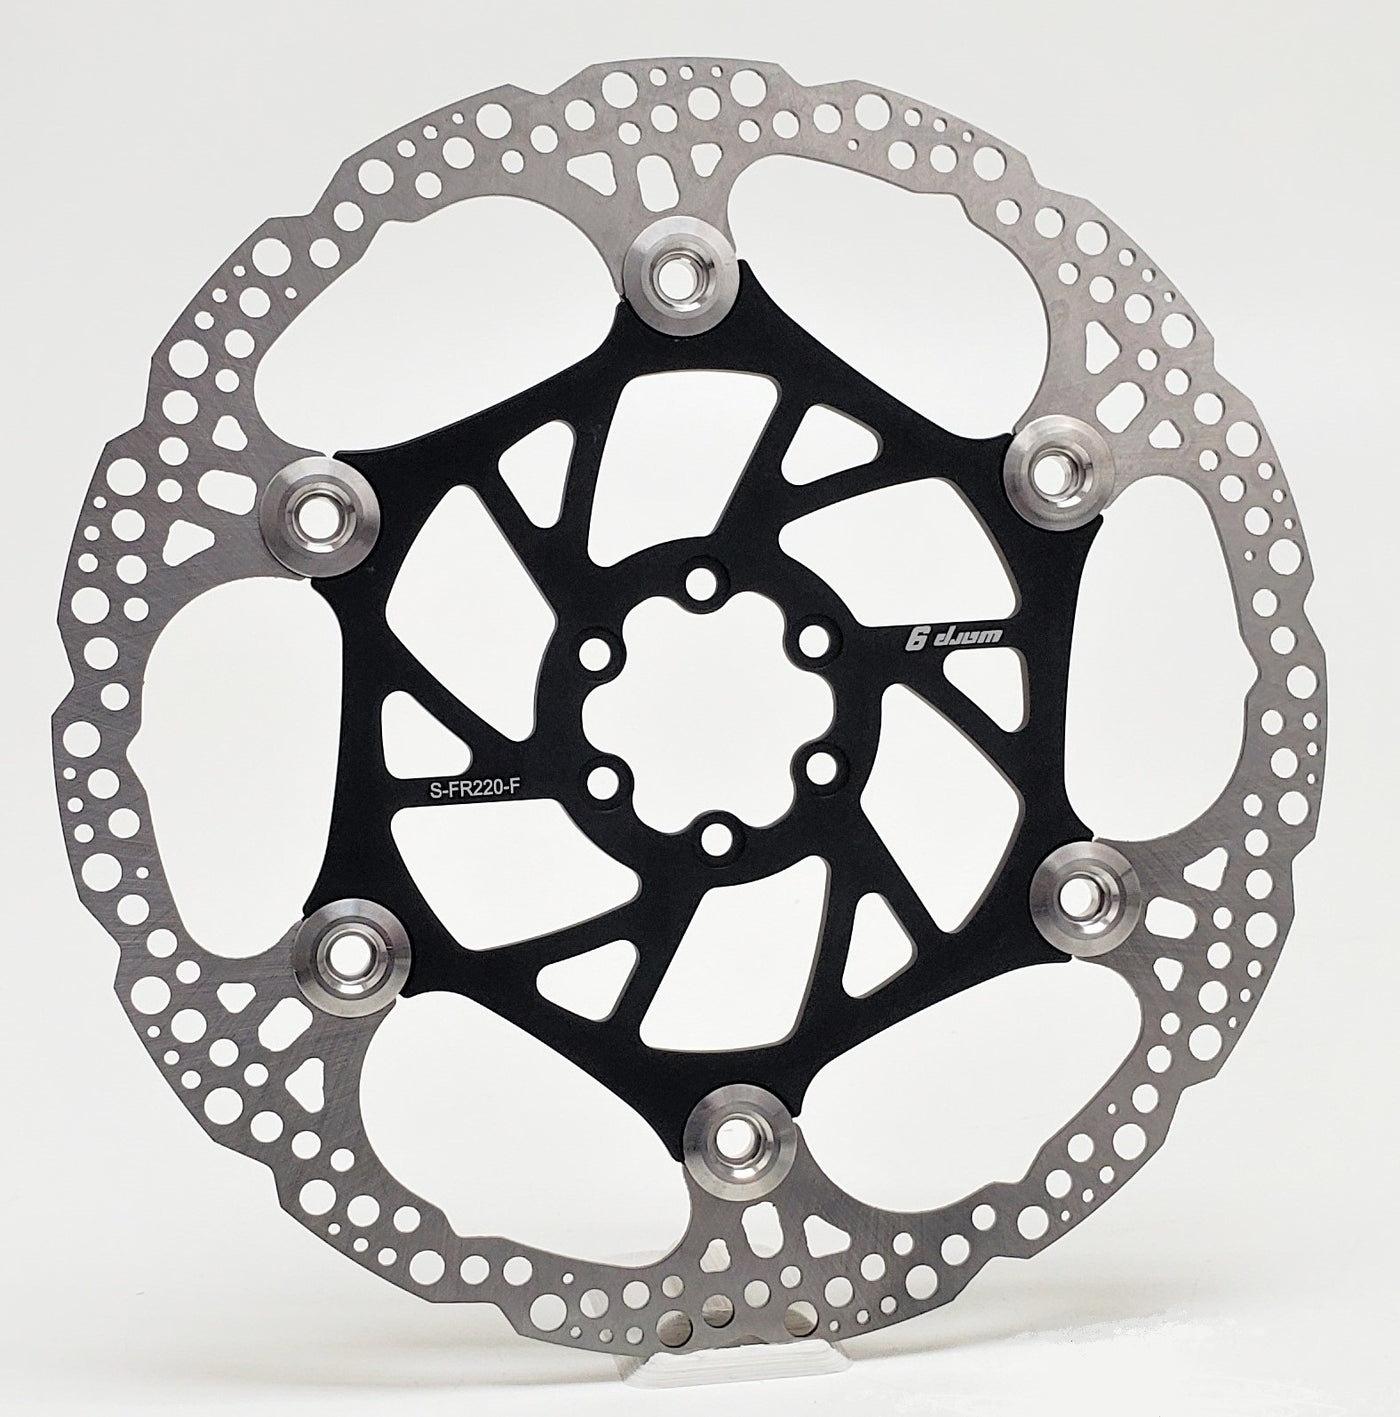 Warp9 220mm floating front brake disc for the Surron Light Bee